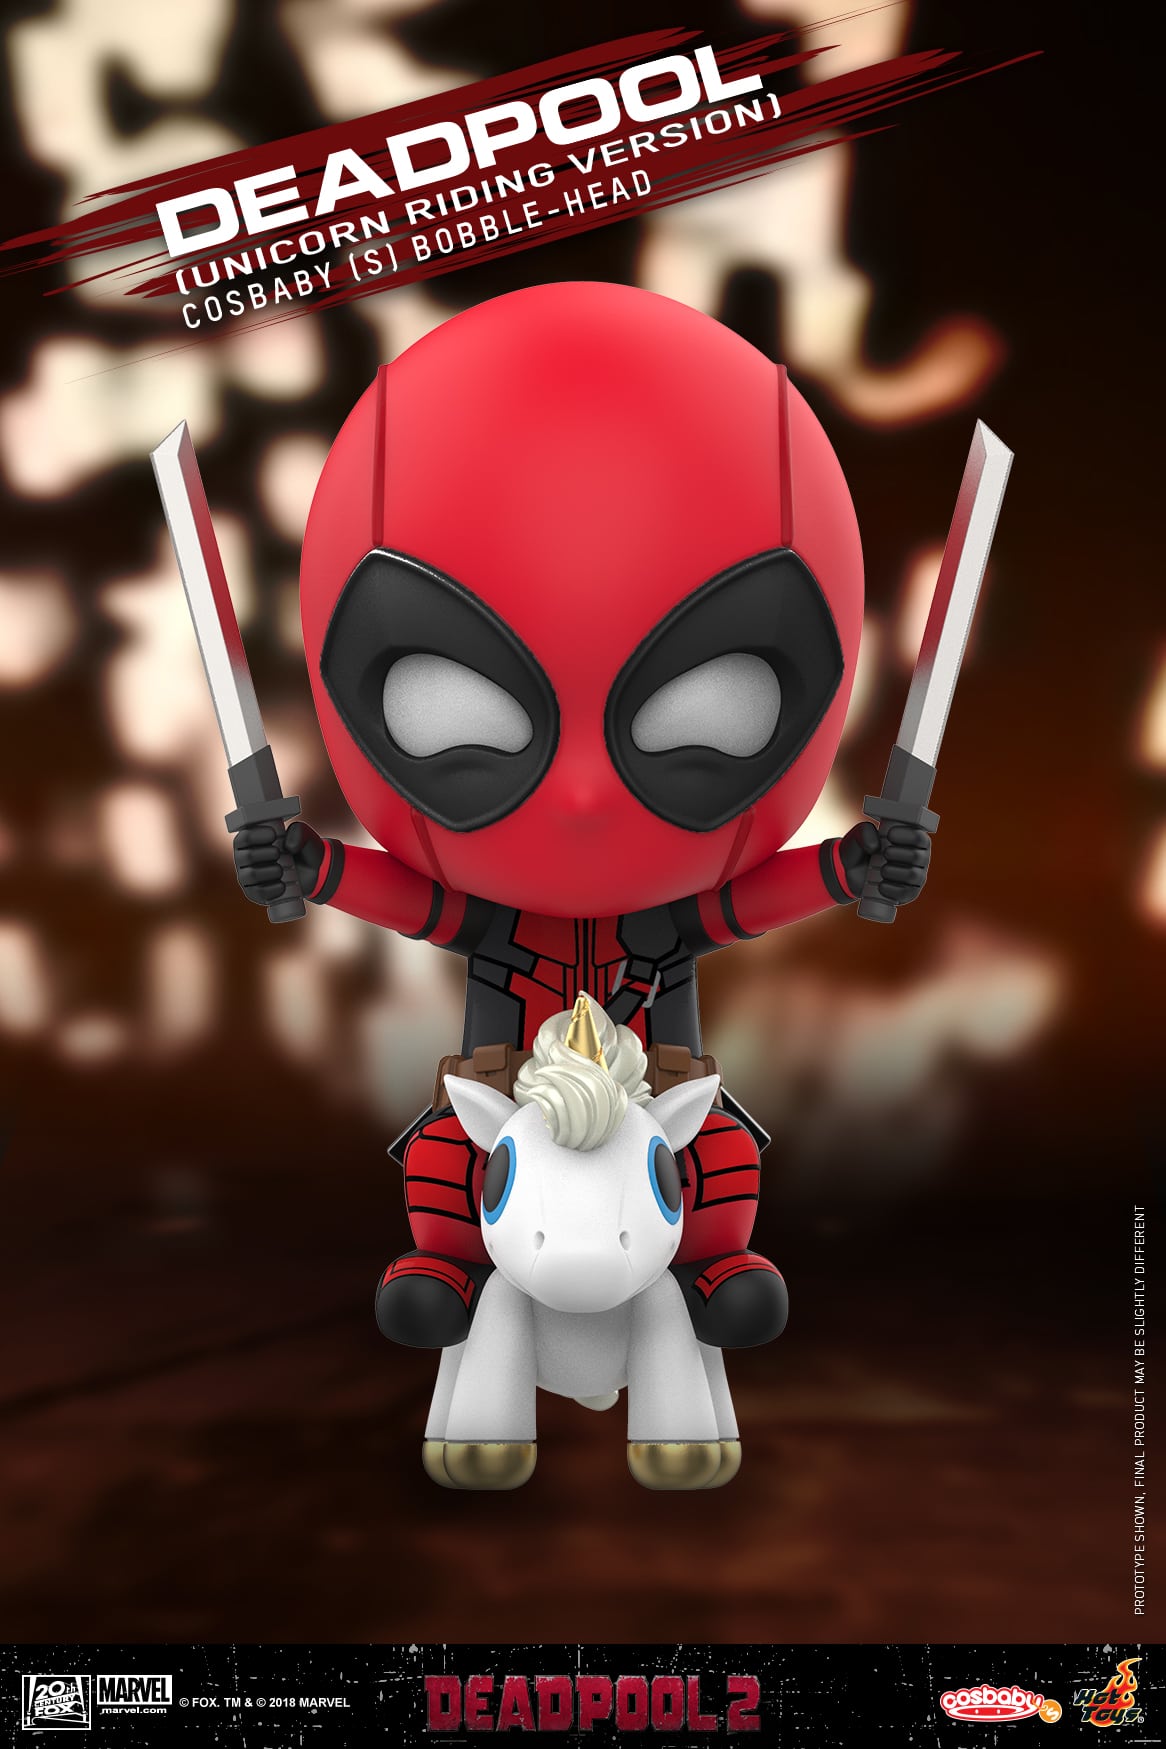 Hot Toys unveils a new wave of Deadpool Cosbaby Bobble-heads1166 x 1749